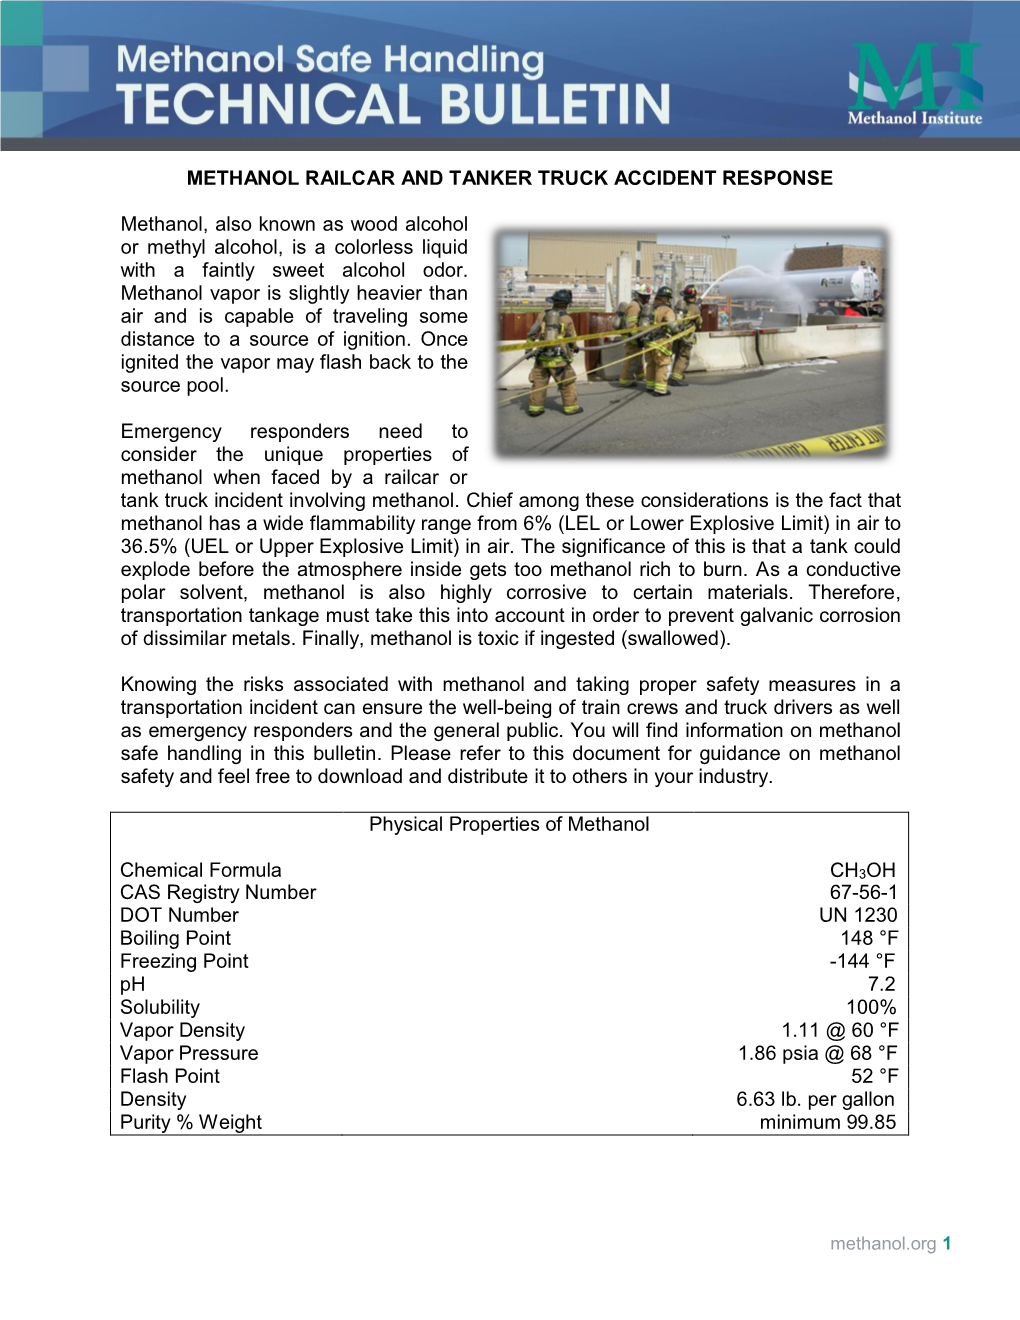 Methanol Railcar and Tanker Truck Accident Response